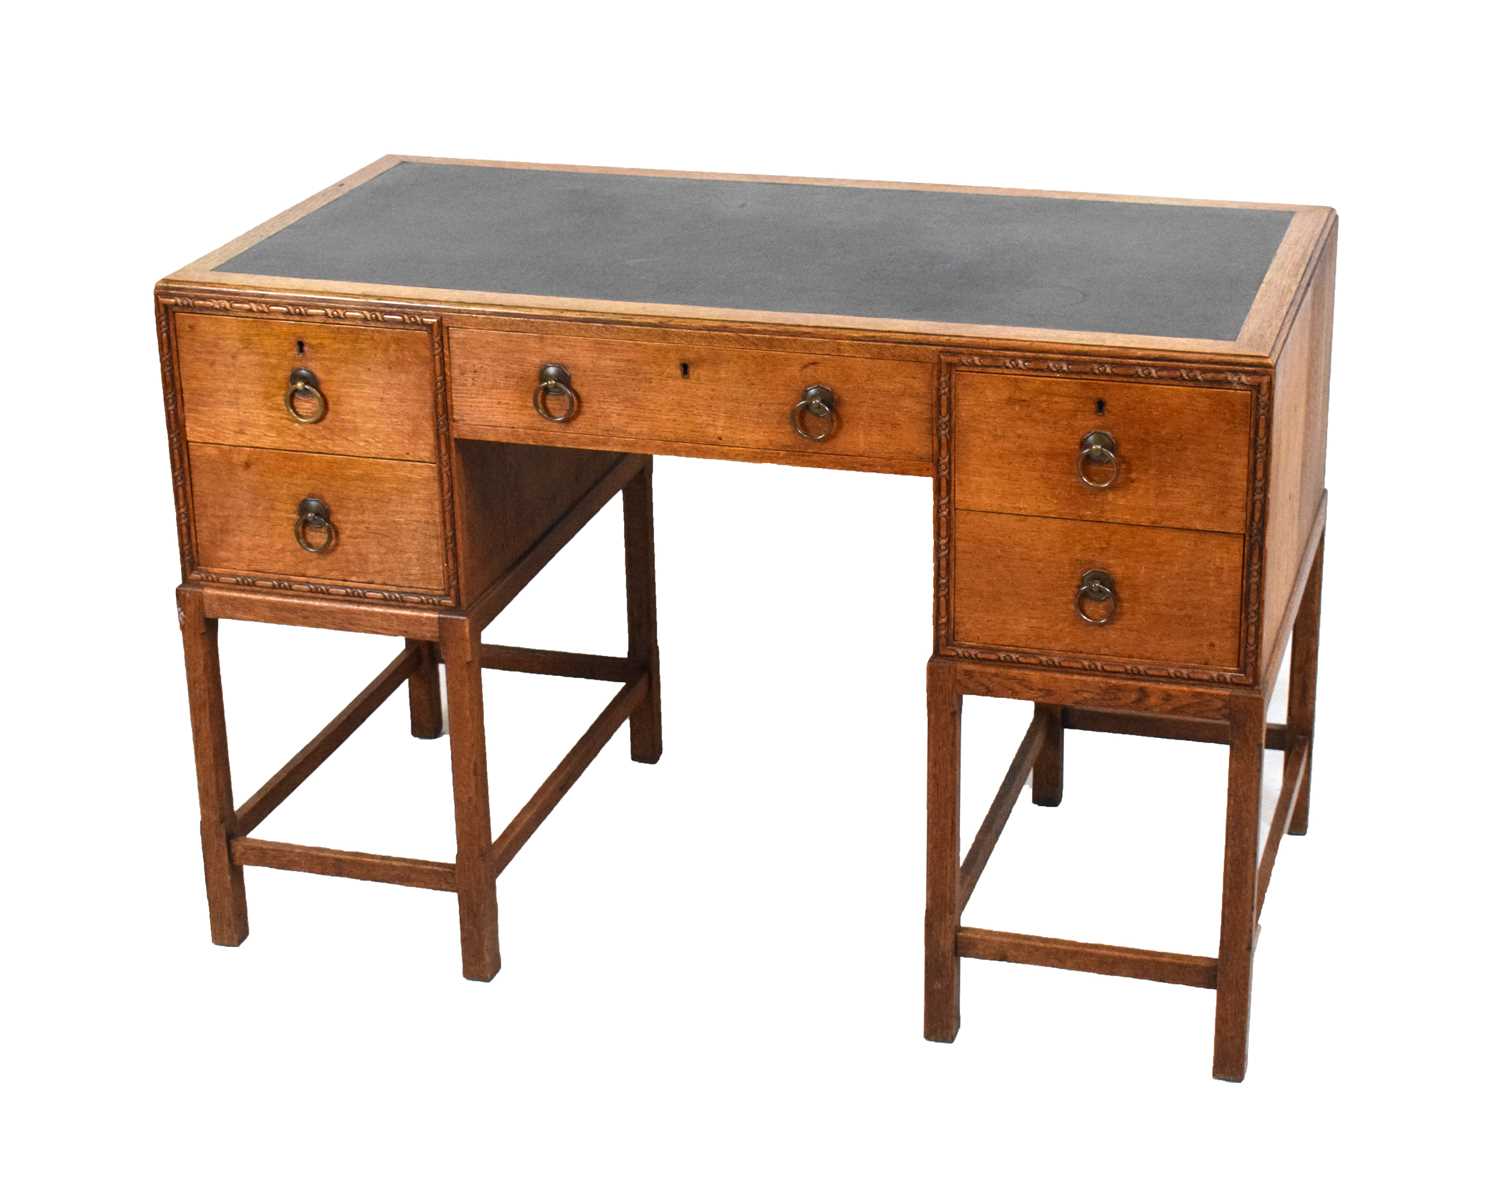 1920s Arts and Crafts oak desk, in the style of Gordon Russell of Broadway